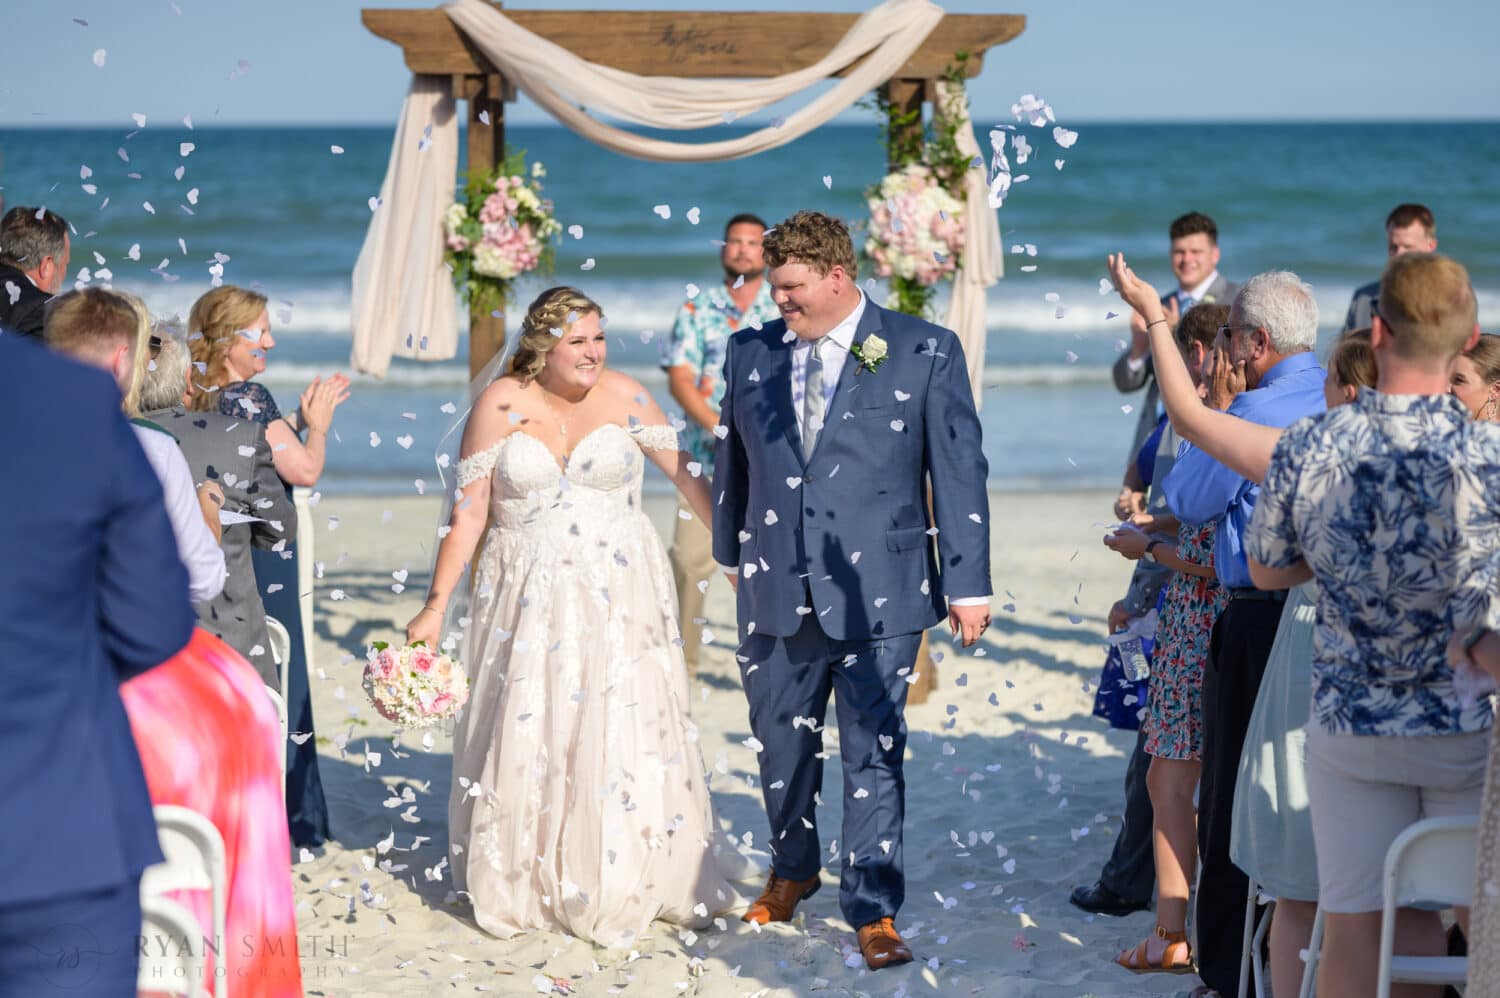 Throwing petals after the ceremony - Pawleys Island Beach House